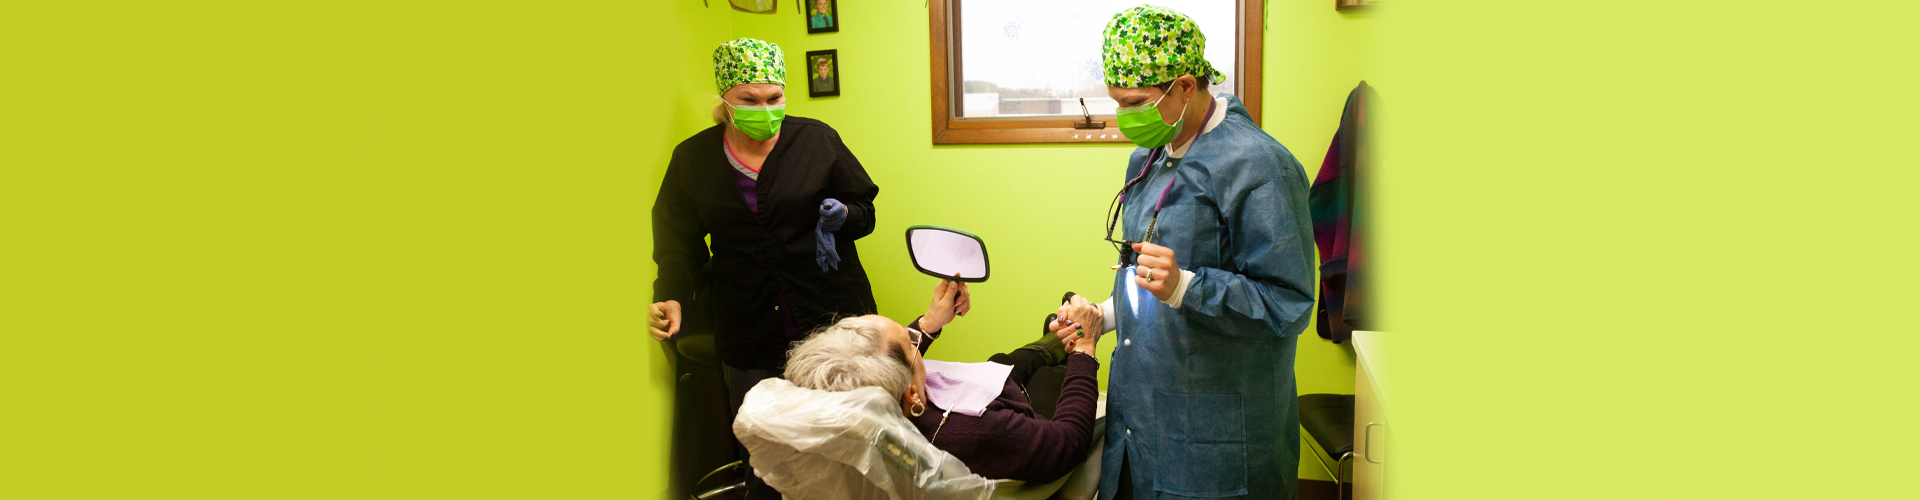 Dental Exams and Cleanings in Manton, MI